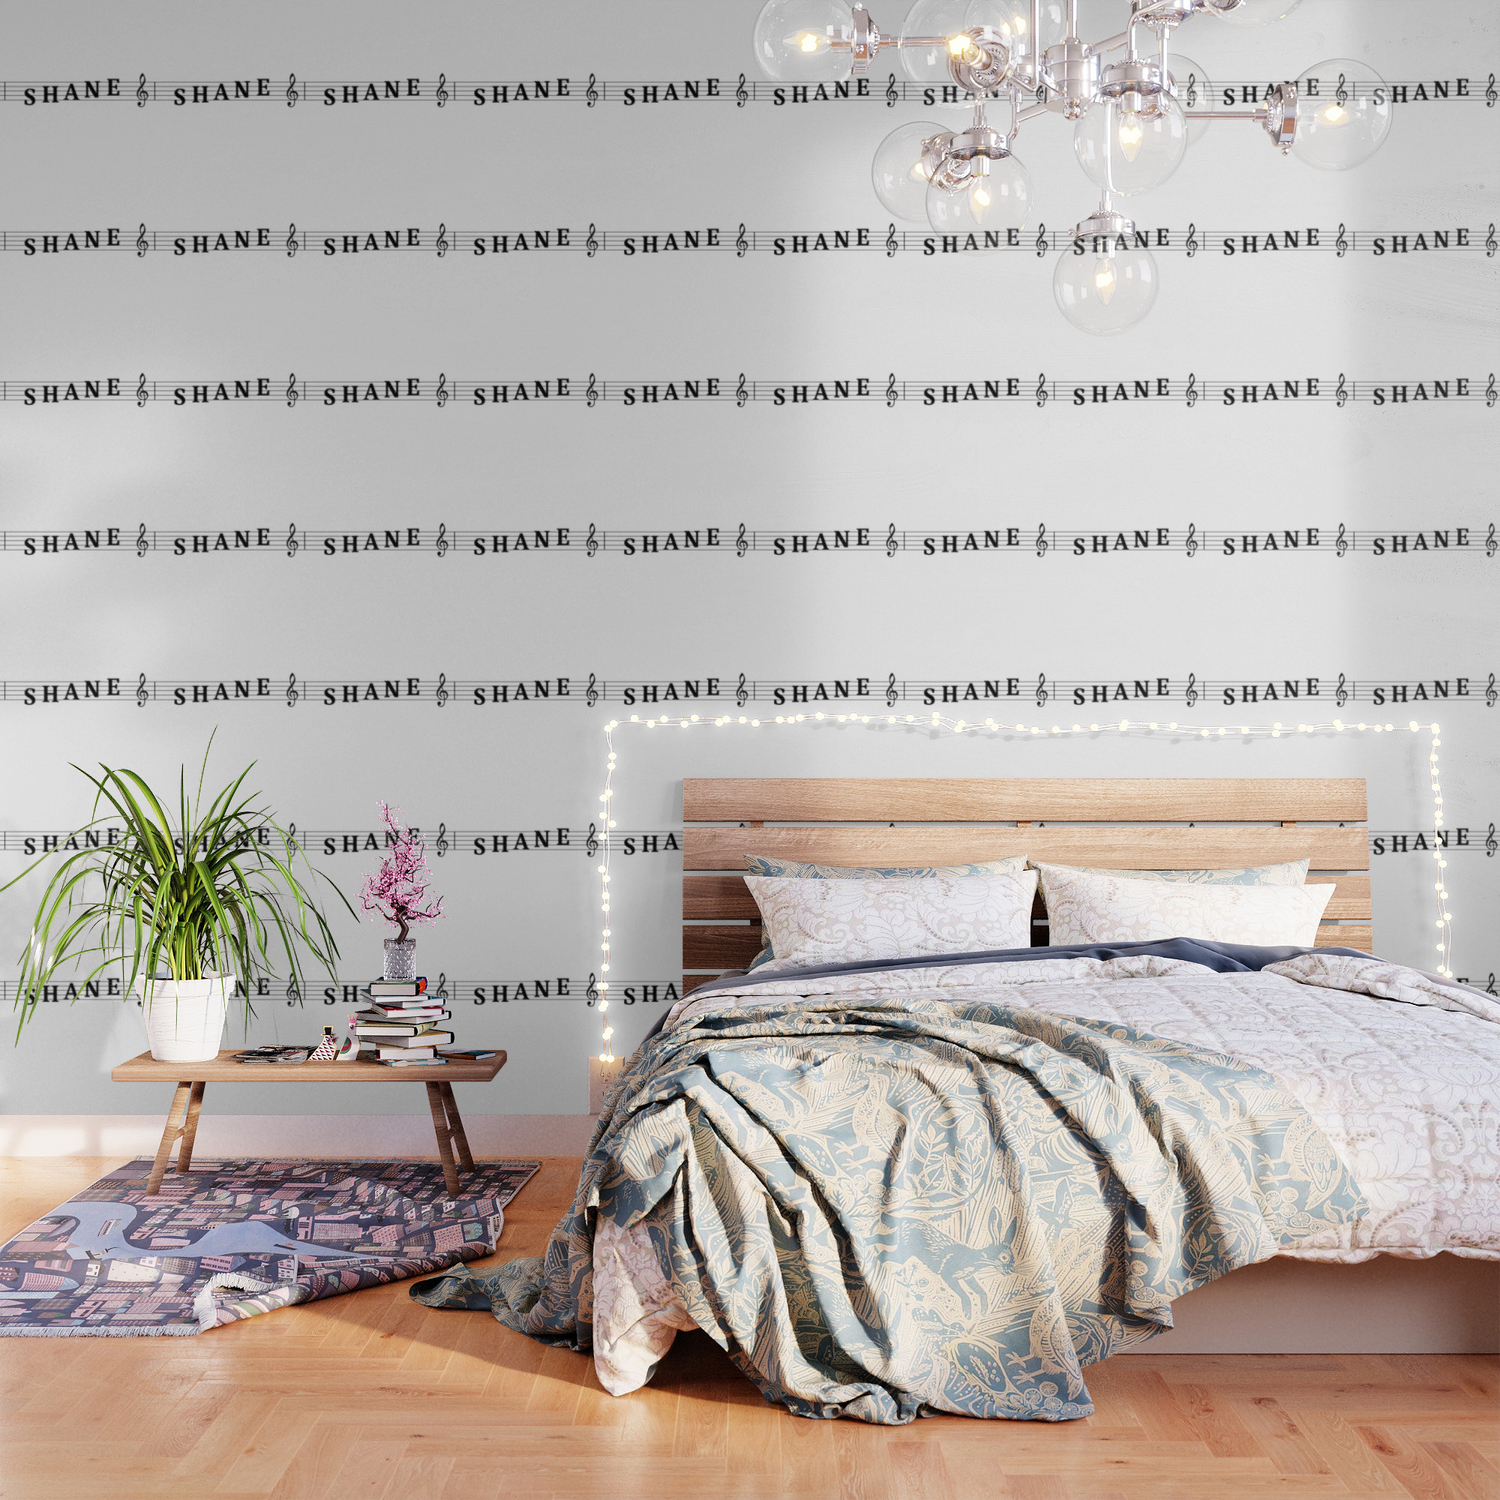 Name Shane Wallpaper by gulden | Society6